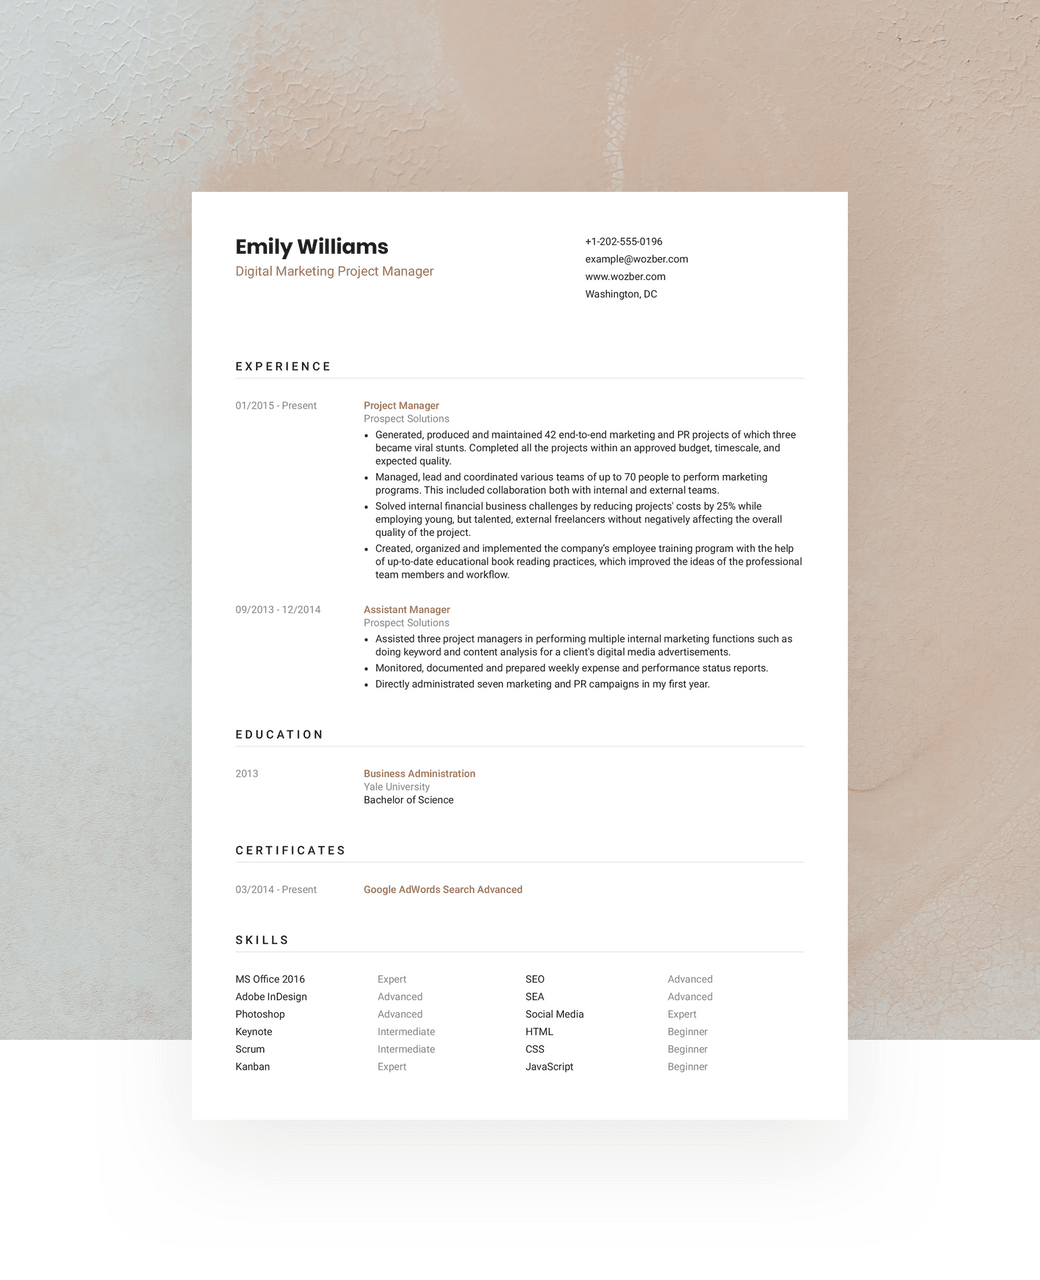 An ATS-friendly CV template with a classic, clean design.